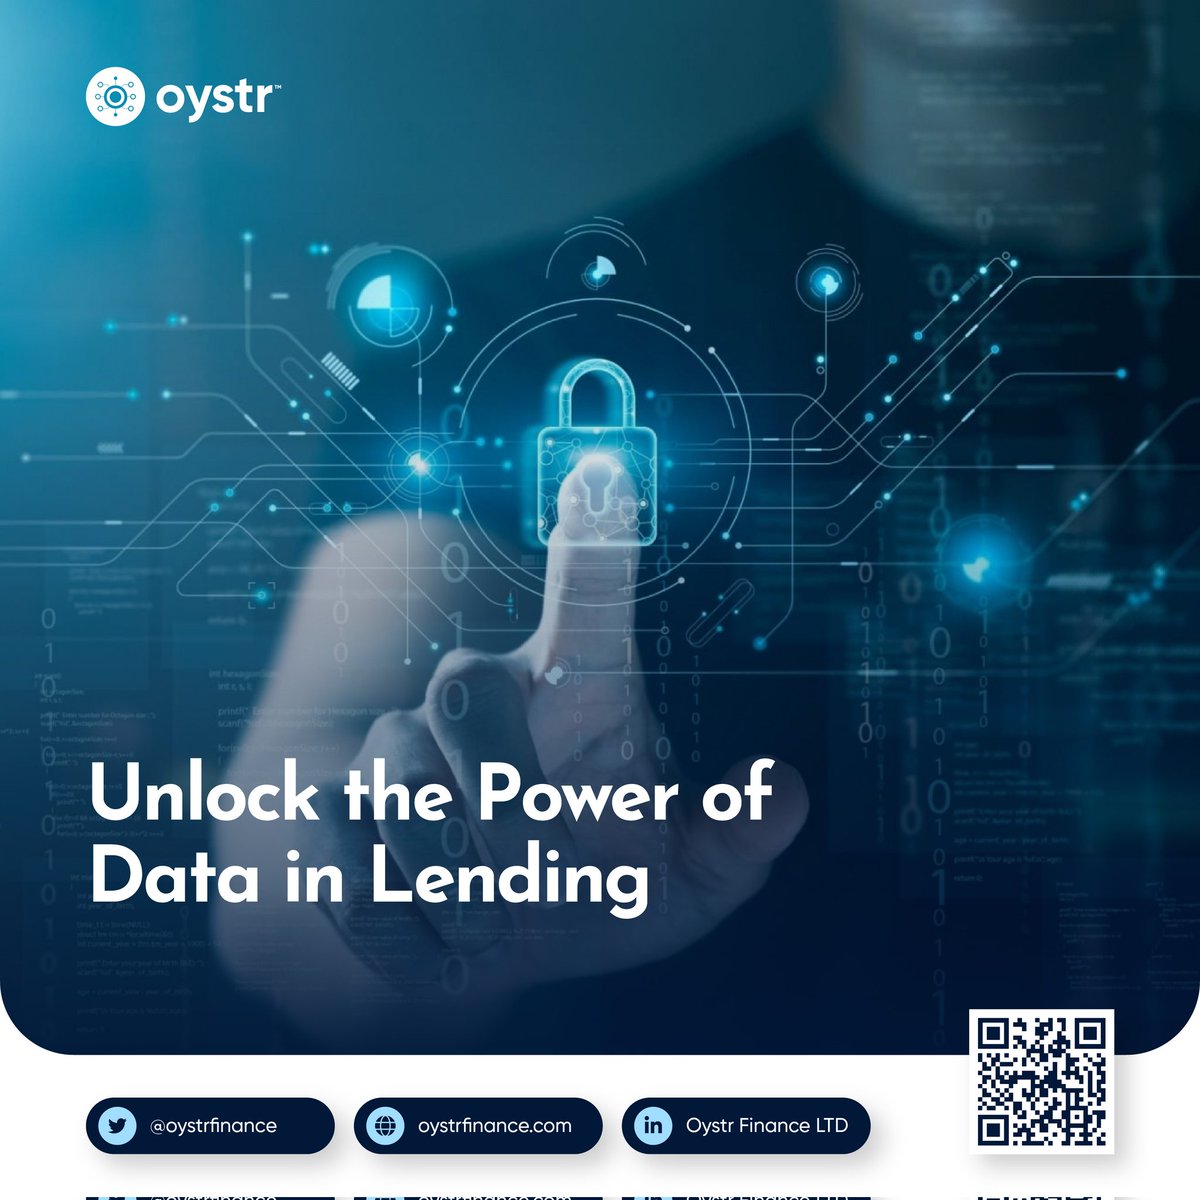 Oystr TH transforms lending risk analysis for smarter decisions to enable your business to thrive.

#riskmanagement #data #accuratedata #oystr #BusinessGrowth